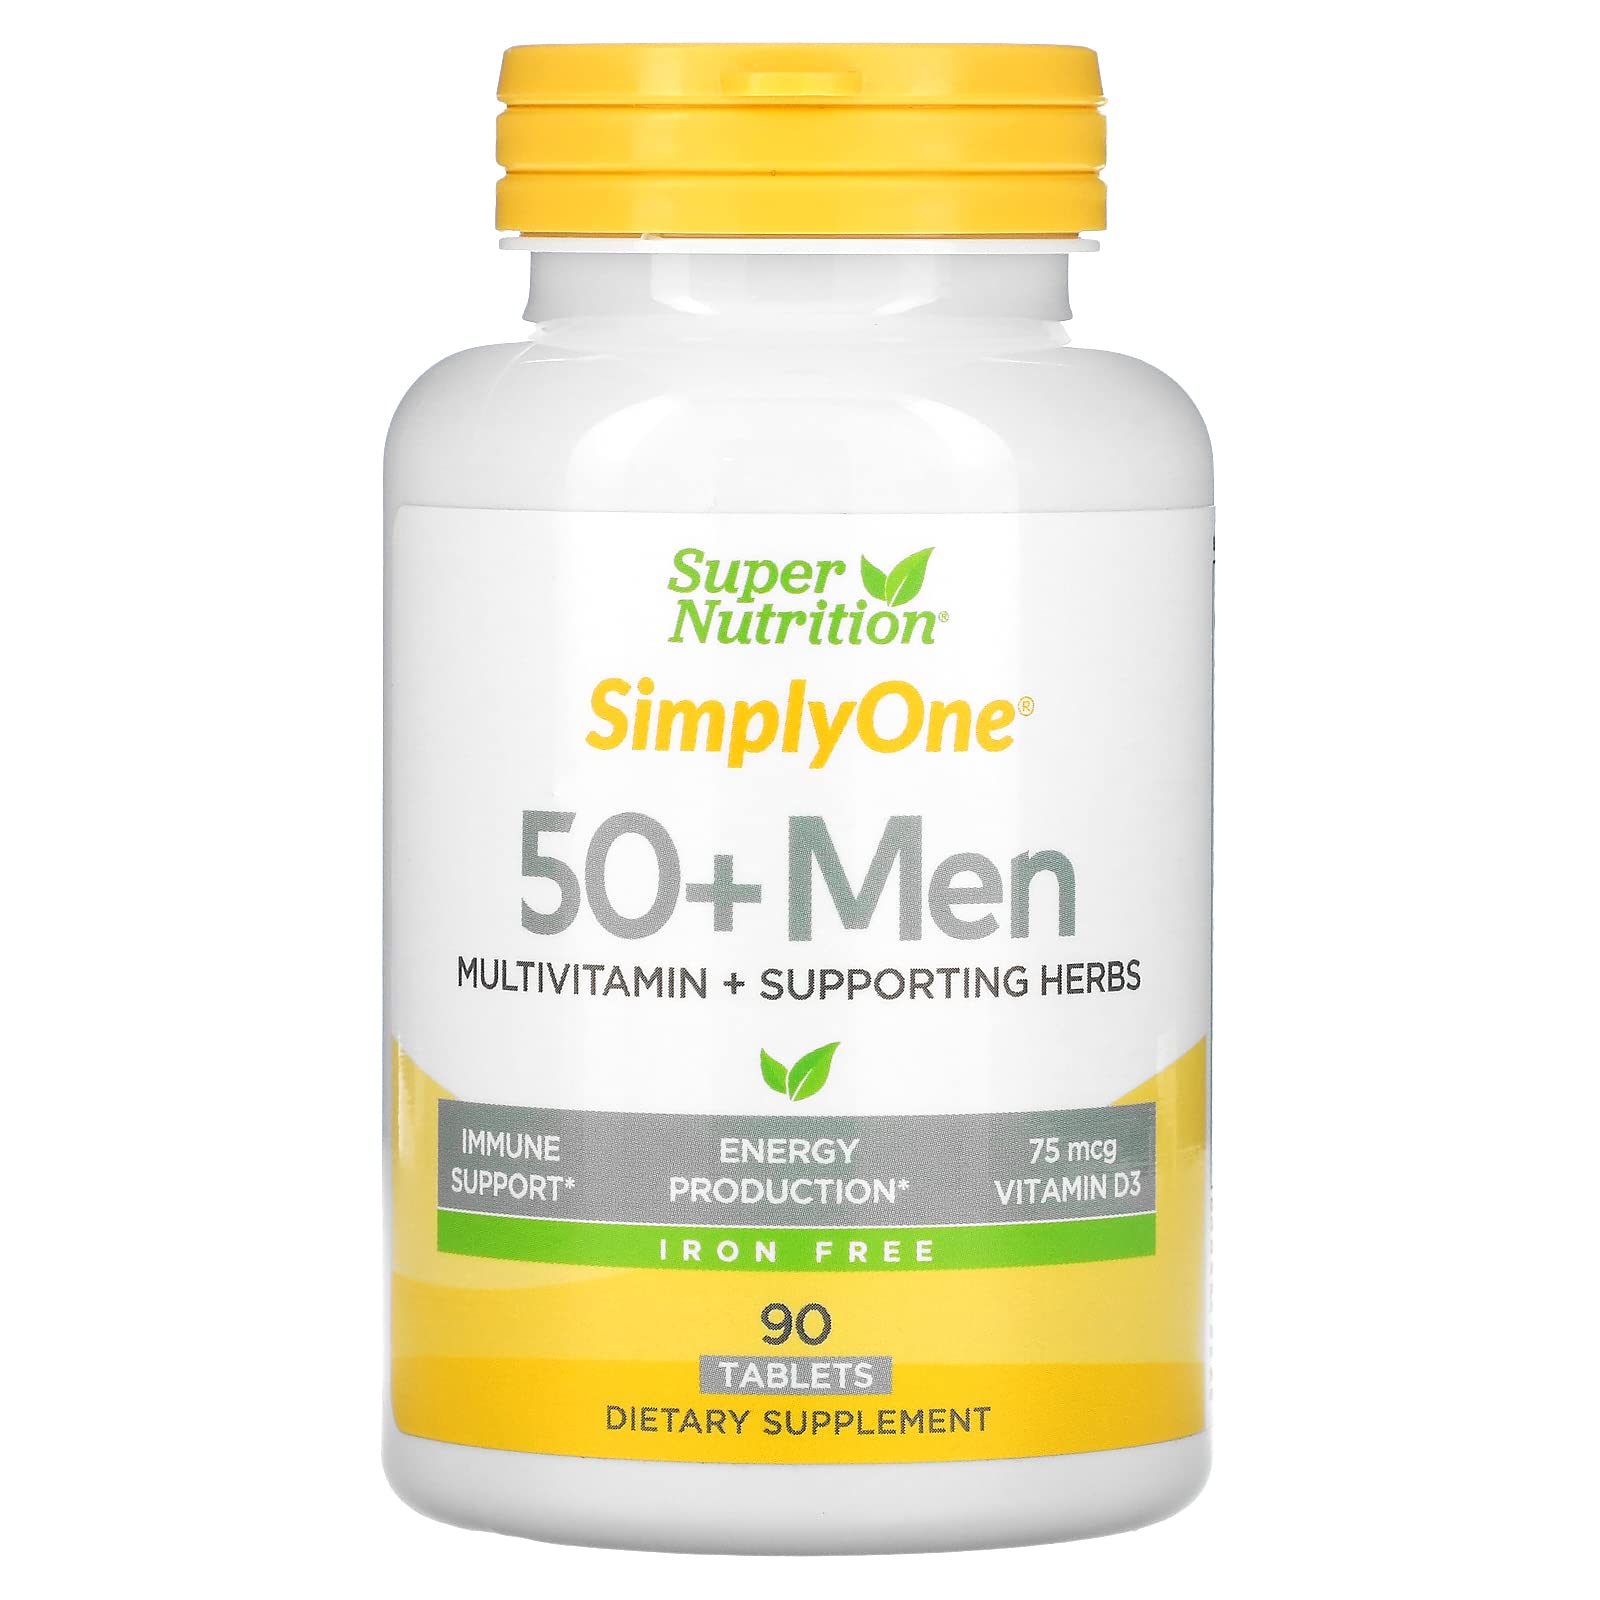 SuperNutrition , SimplyOne Multi-Vitamin for Men 50+, Iron-Free, High-Potency, One/Day Tablets, Day Supply 90 Count